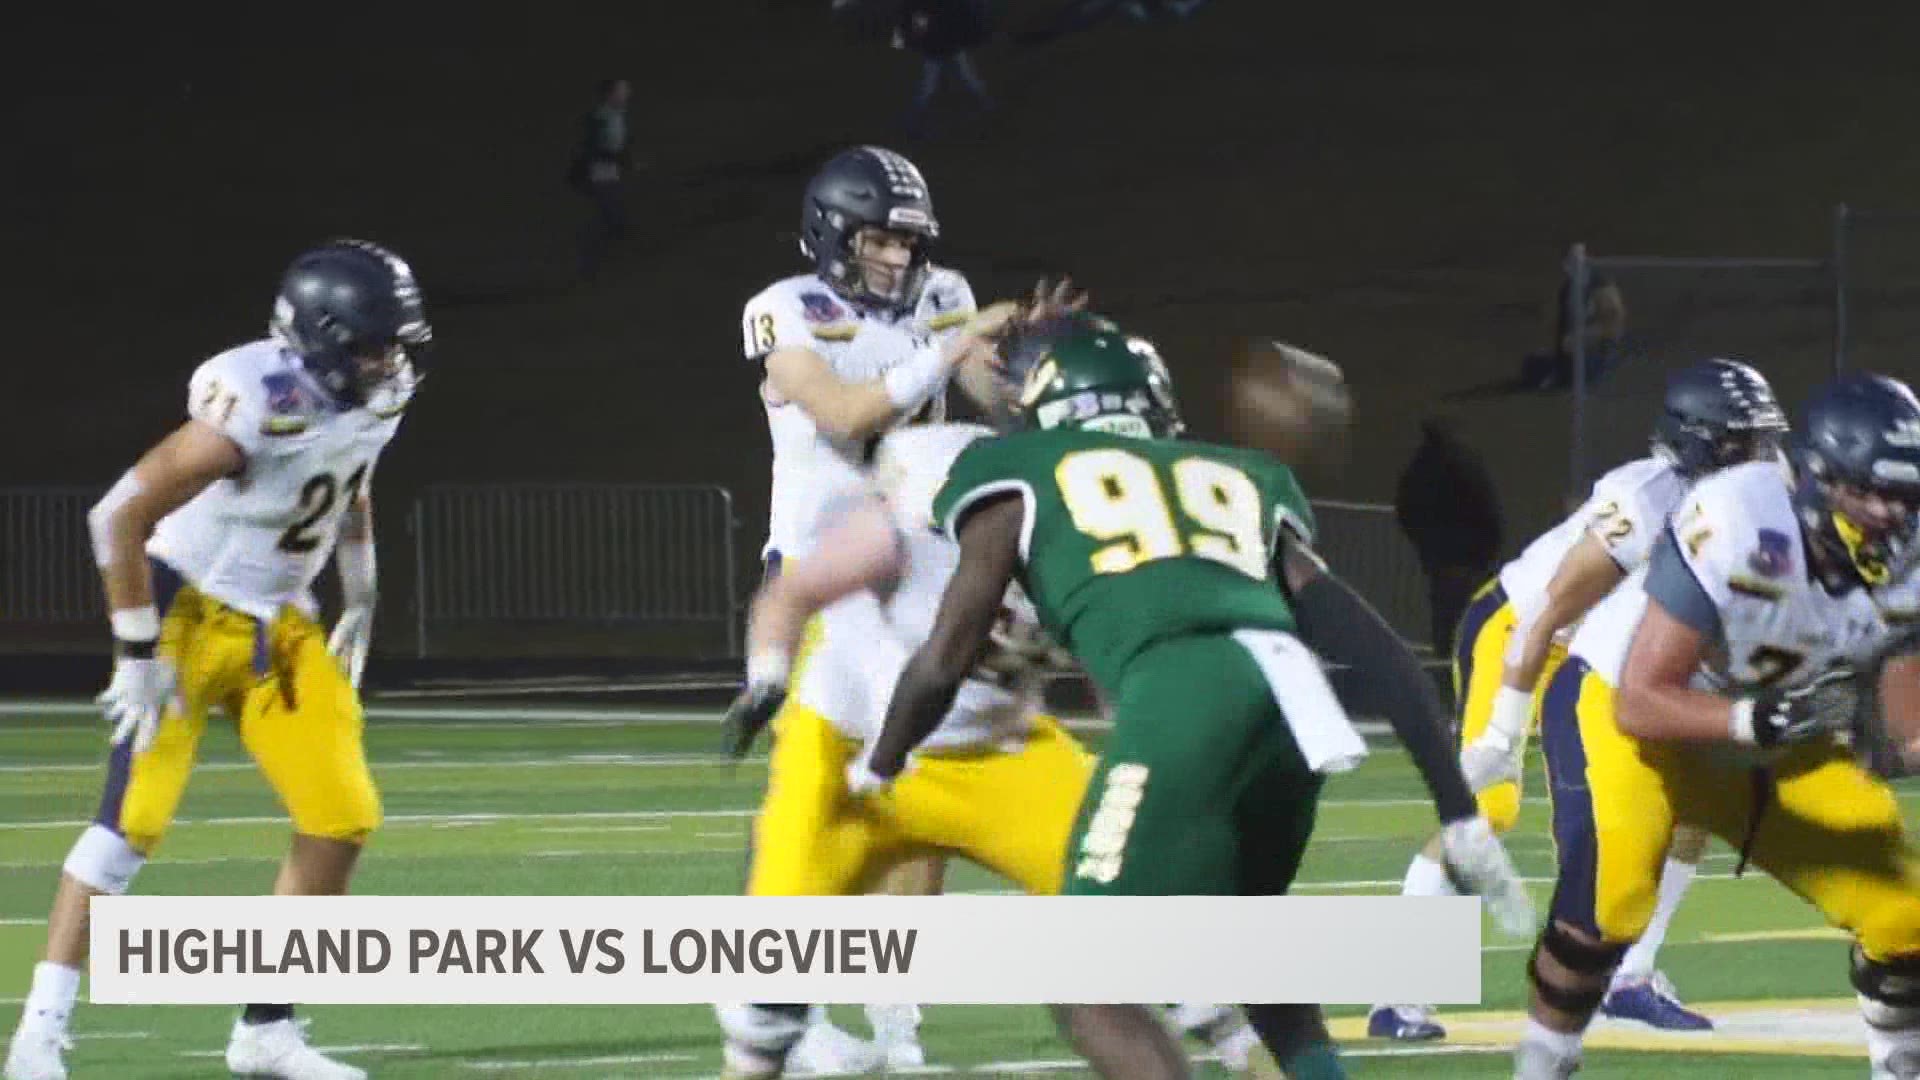 The Longview Lobos traveled to Highland Park to take on the Scots for some Friday football action.